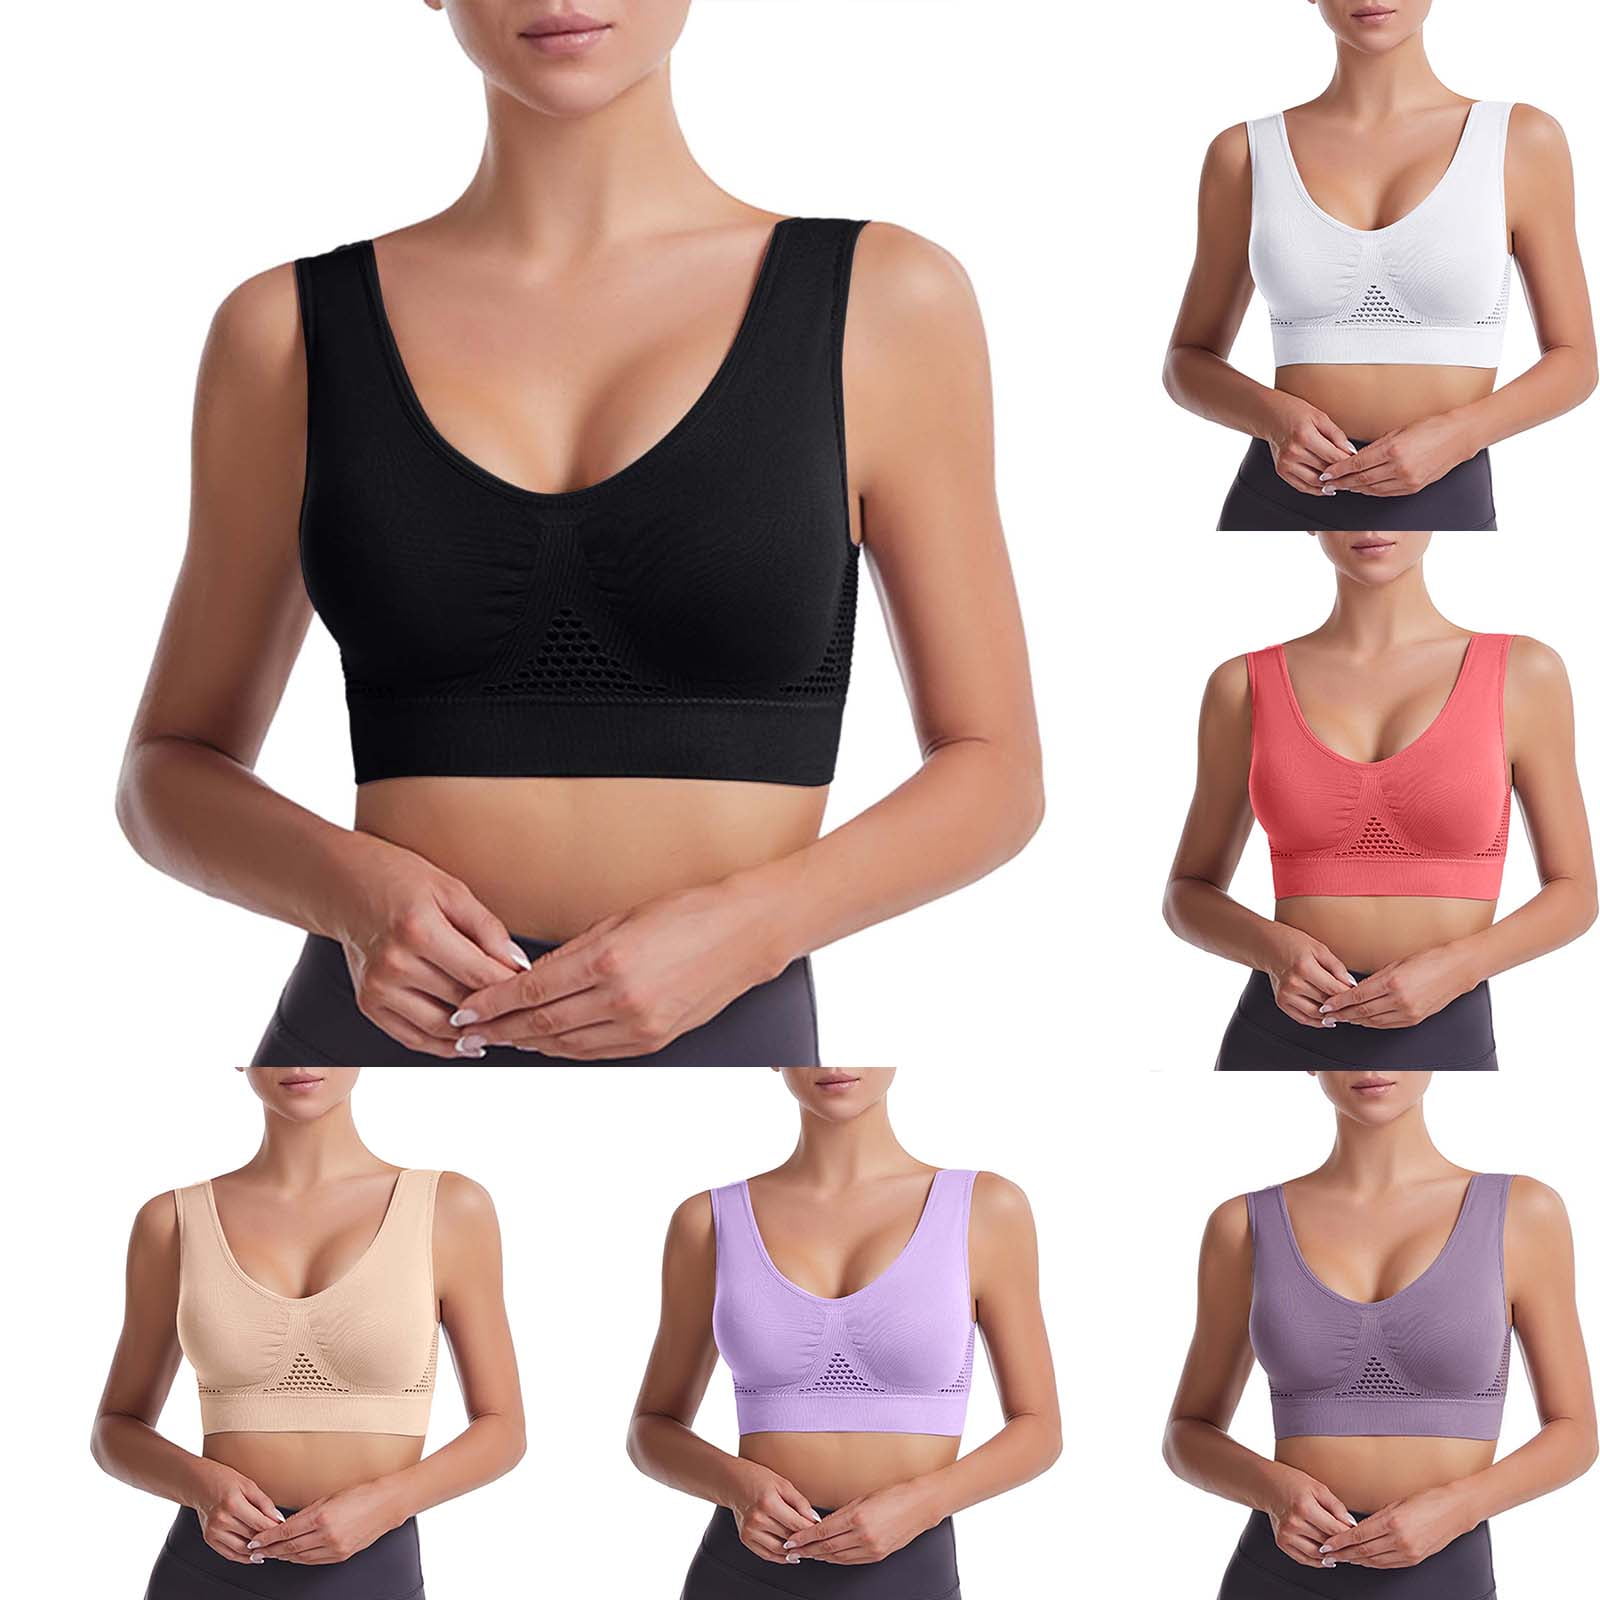 TOWED22 Plus Size Bras For Women,Women's Low Impact Padded Sports Bra for Women  Low Cut Wirefree Convertible Straps Yoga Bra Tops,Black 